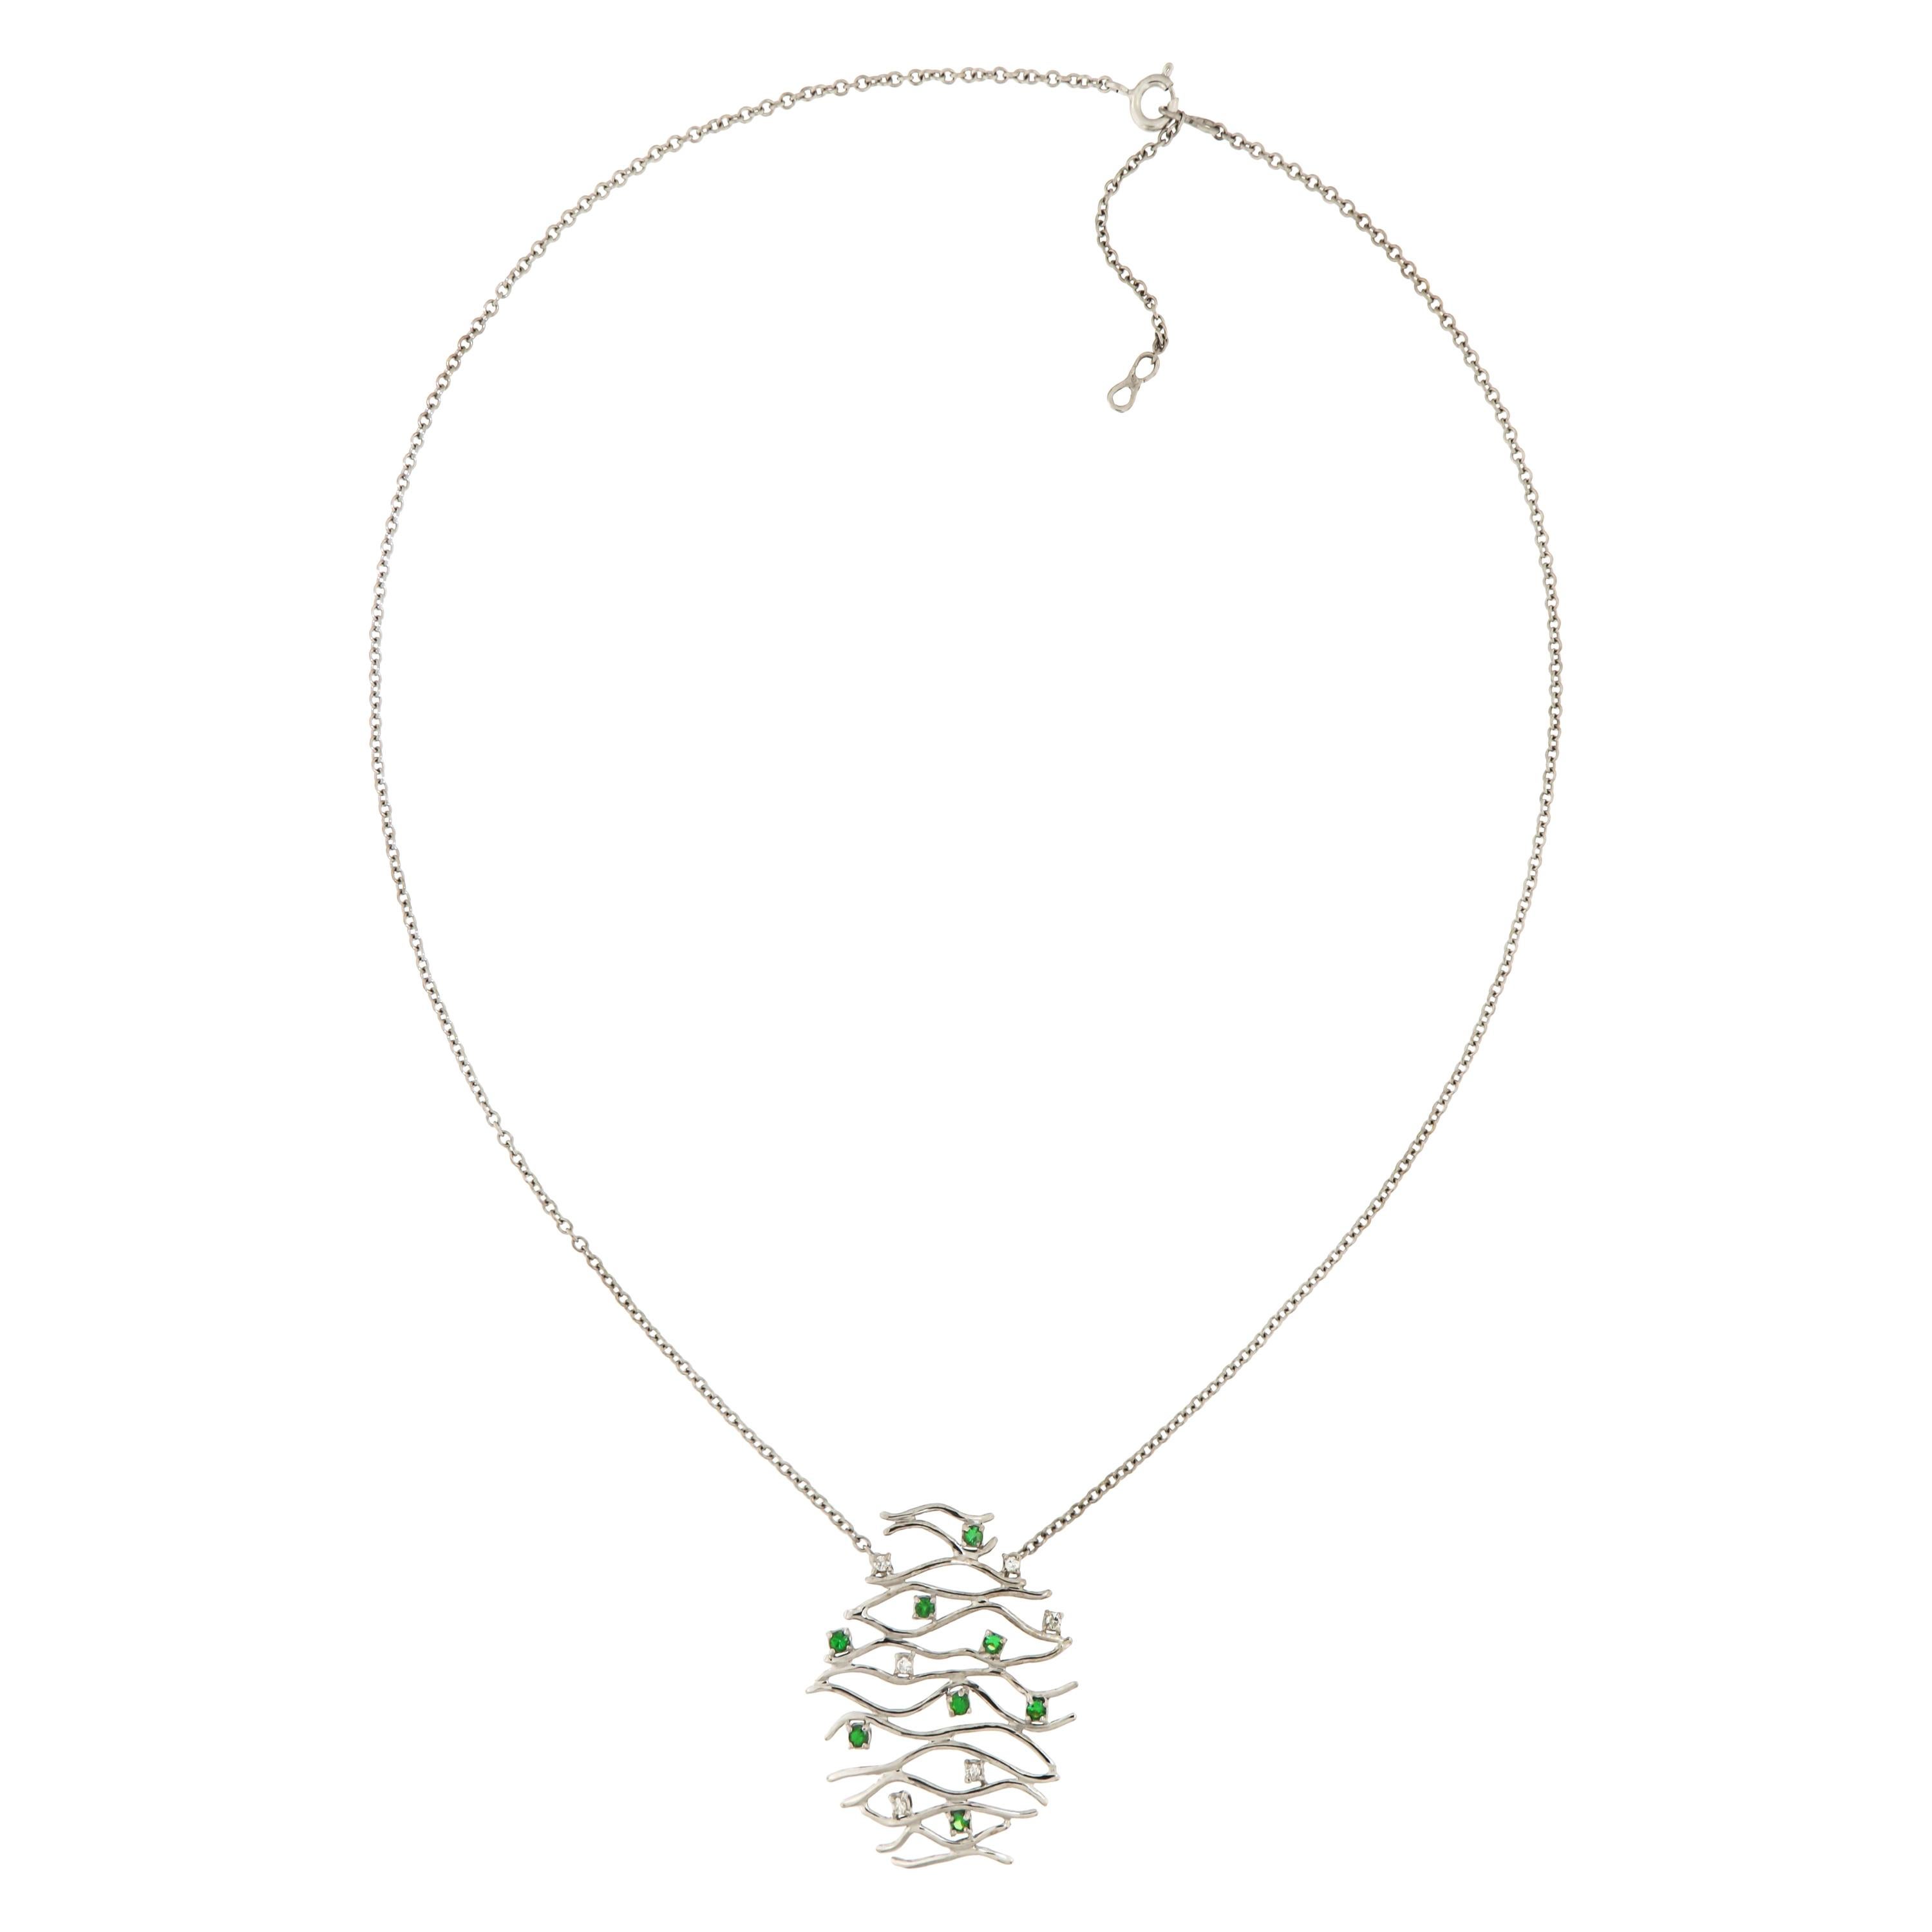 Diamonds Tsavorites White Gold Necklace Handcrafted in Italy by Botta Gioielli For Sale